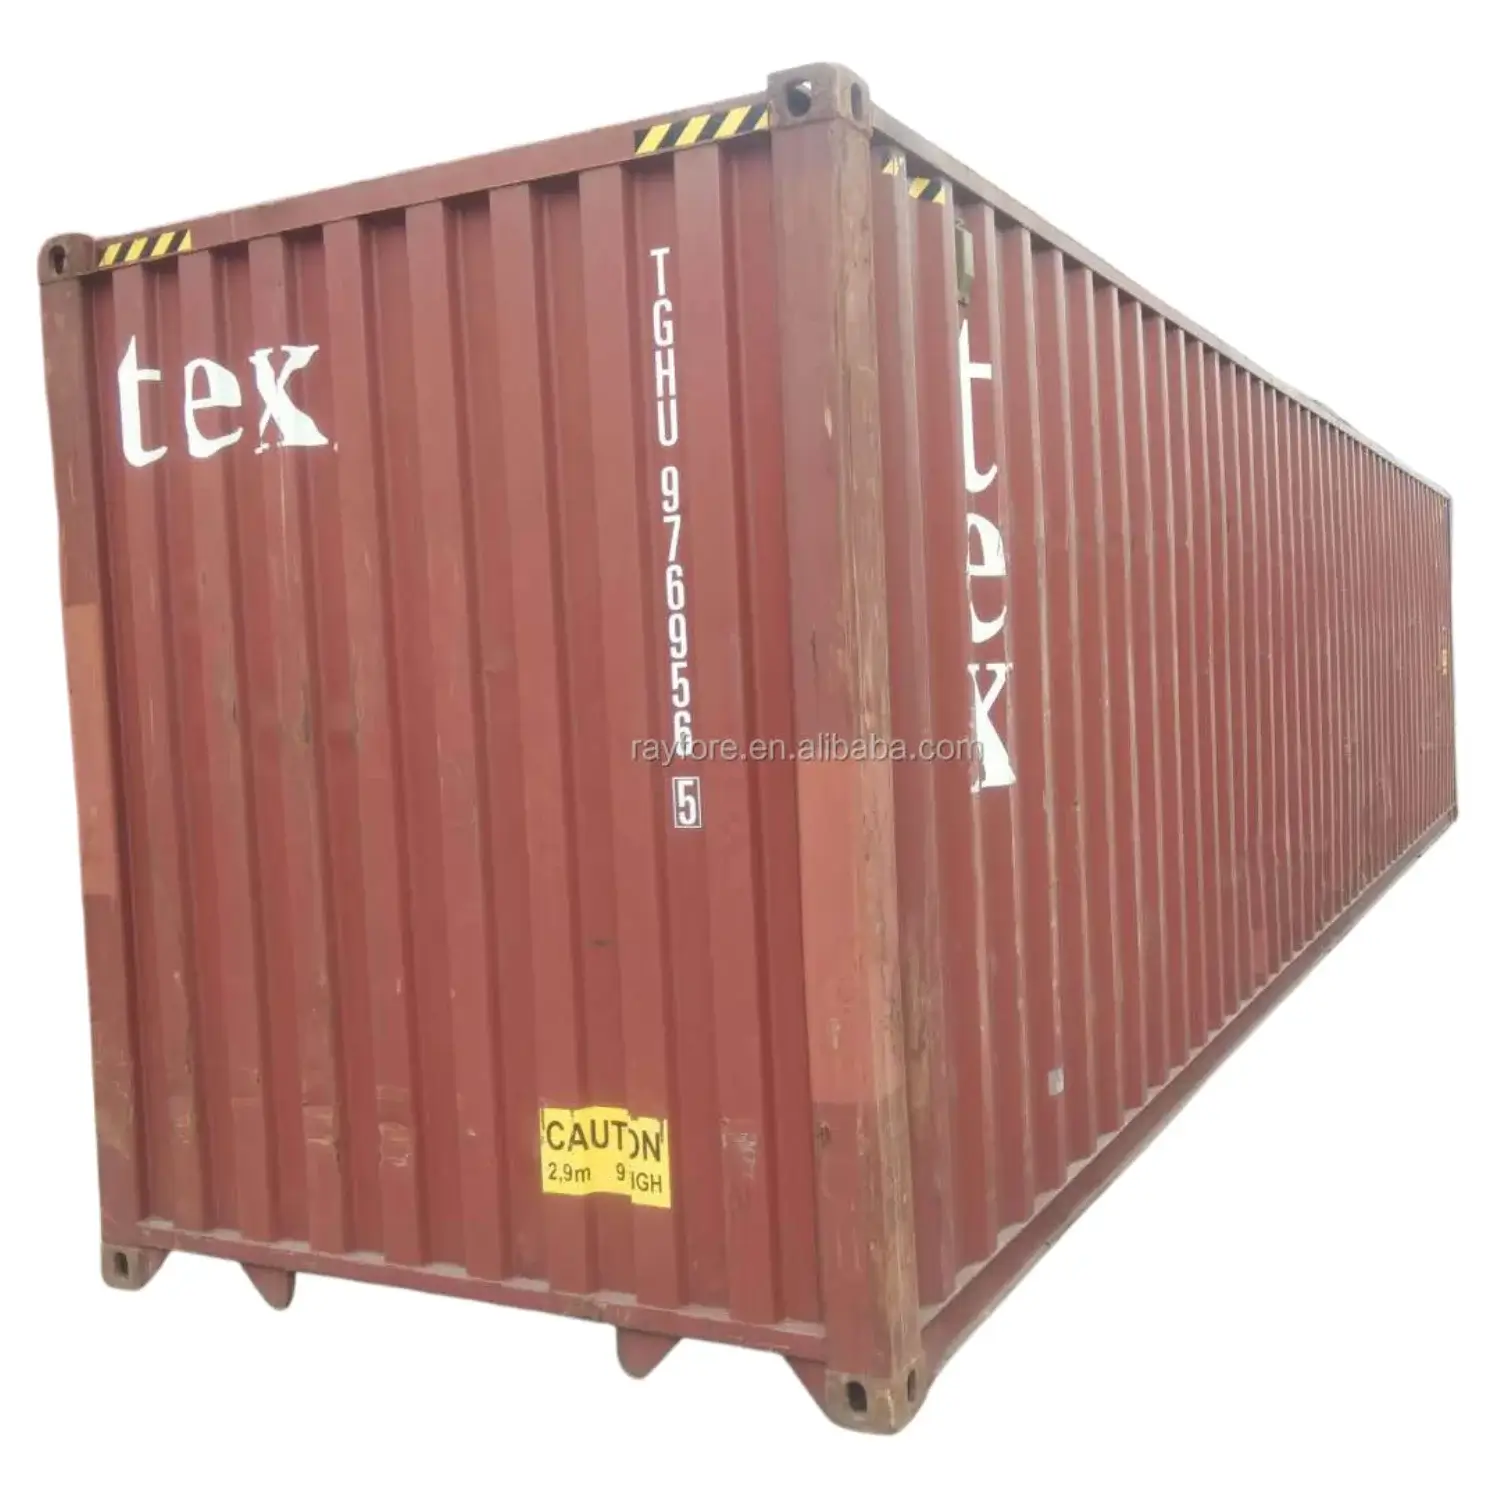 https://onsite-cdn.sfo3.cdn.digitaloceanspaces.com/wp-content/uploads/2022/02/31073645/40ft-used-shipping-container.webp